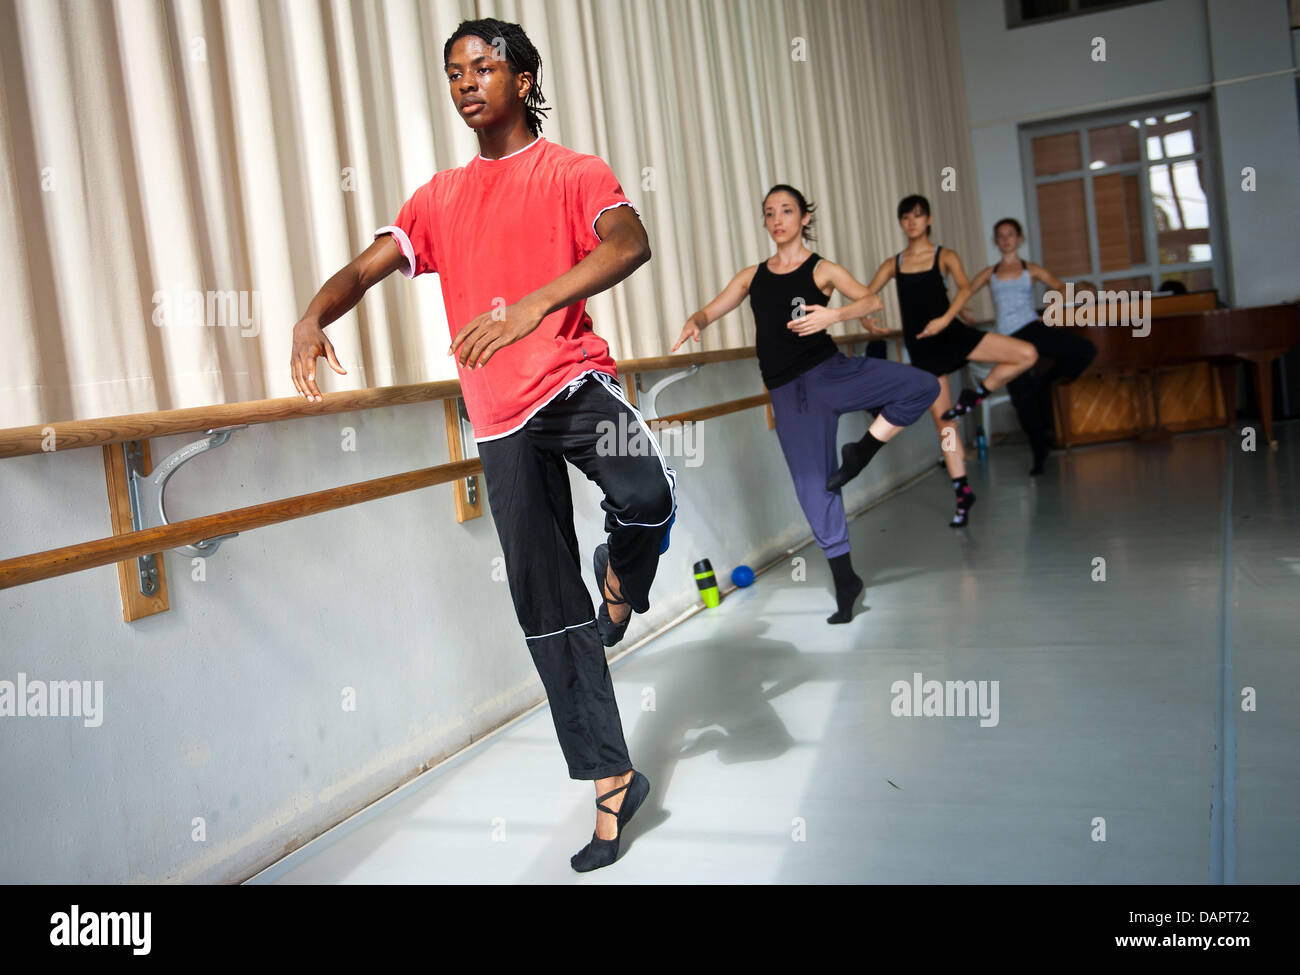 Ballet dancer Jamie Mejeh practices with the Saarland State Theatre-based Donlon Dance Company in Saarbruecken, Germany, 23 August 2011. On 01 September 2011, the 18-year-old will begin his training at the School of Music and Dramatic Arts in Frankfurt even though he has only been a ballet dancer for the past 17 months. Prior to that Mejeh had been a hip hop dancer. Photo: Oliver D Stock Photo